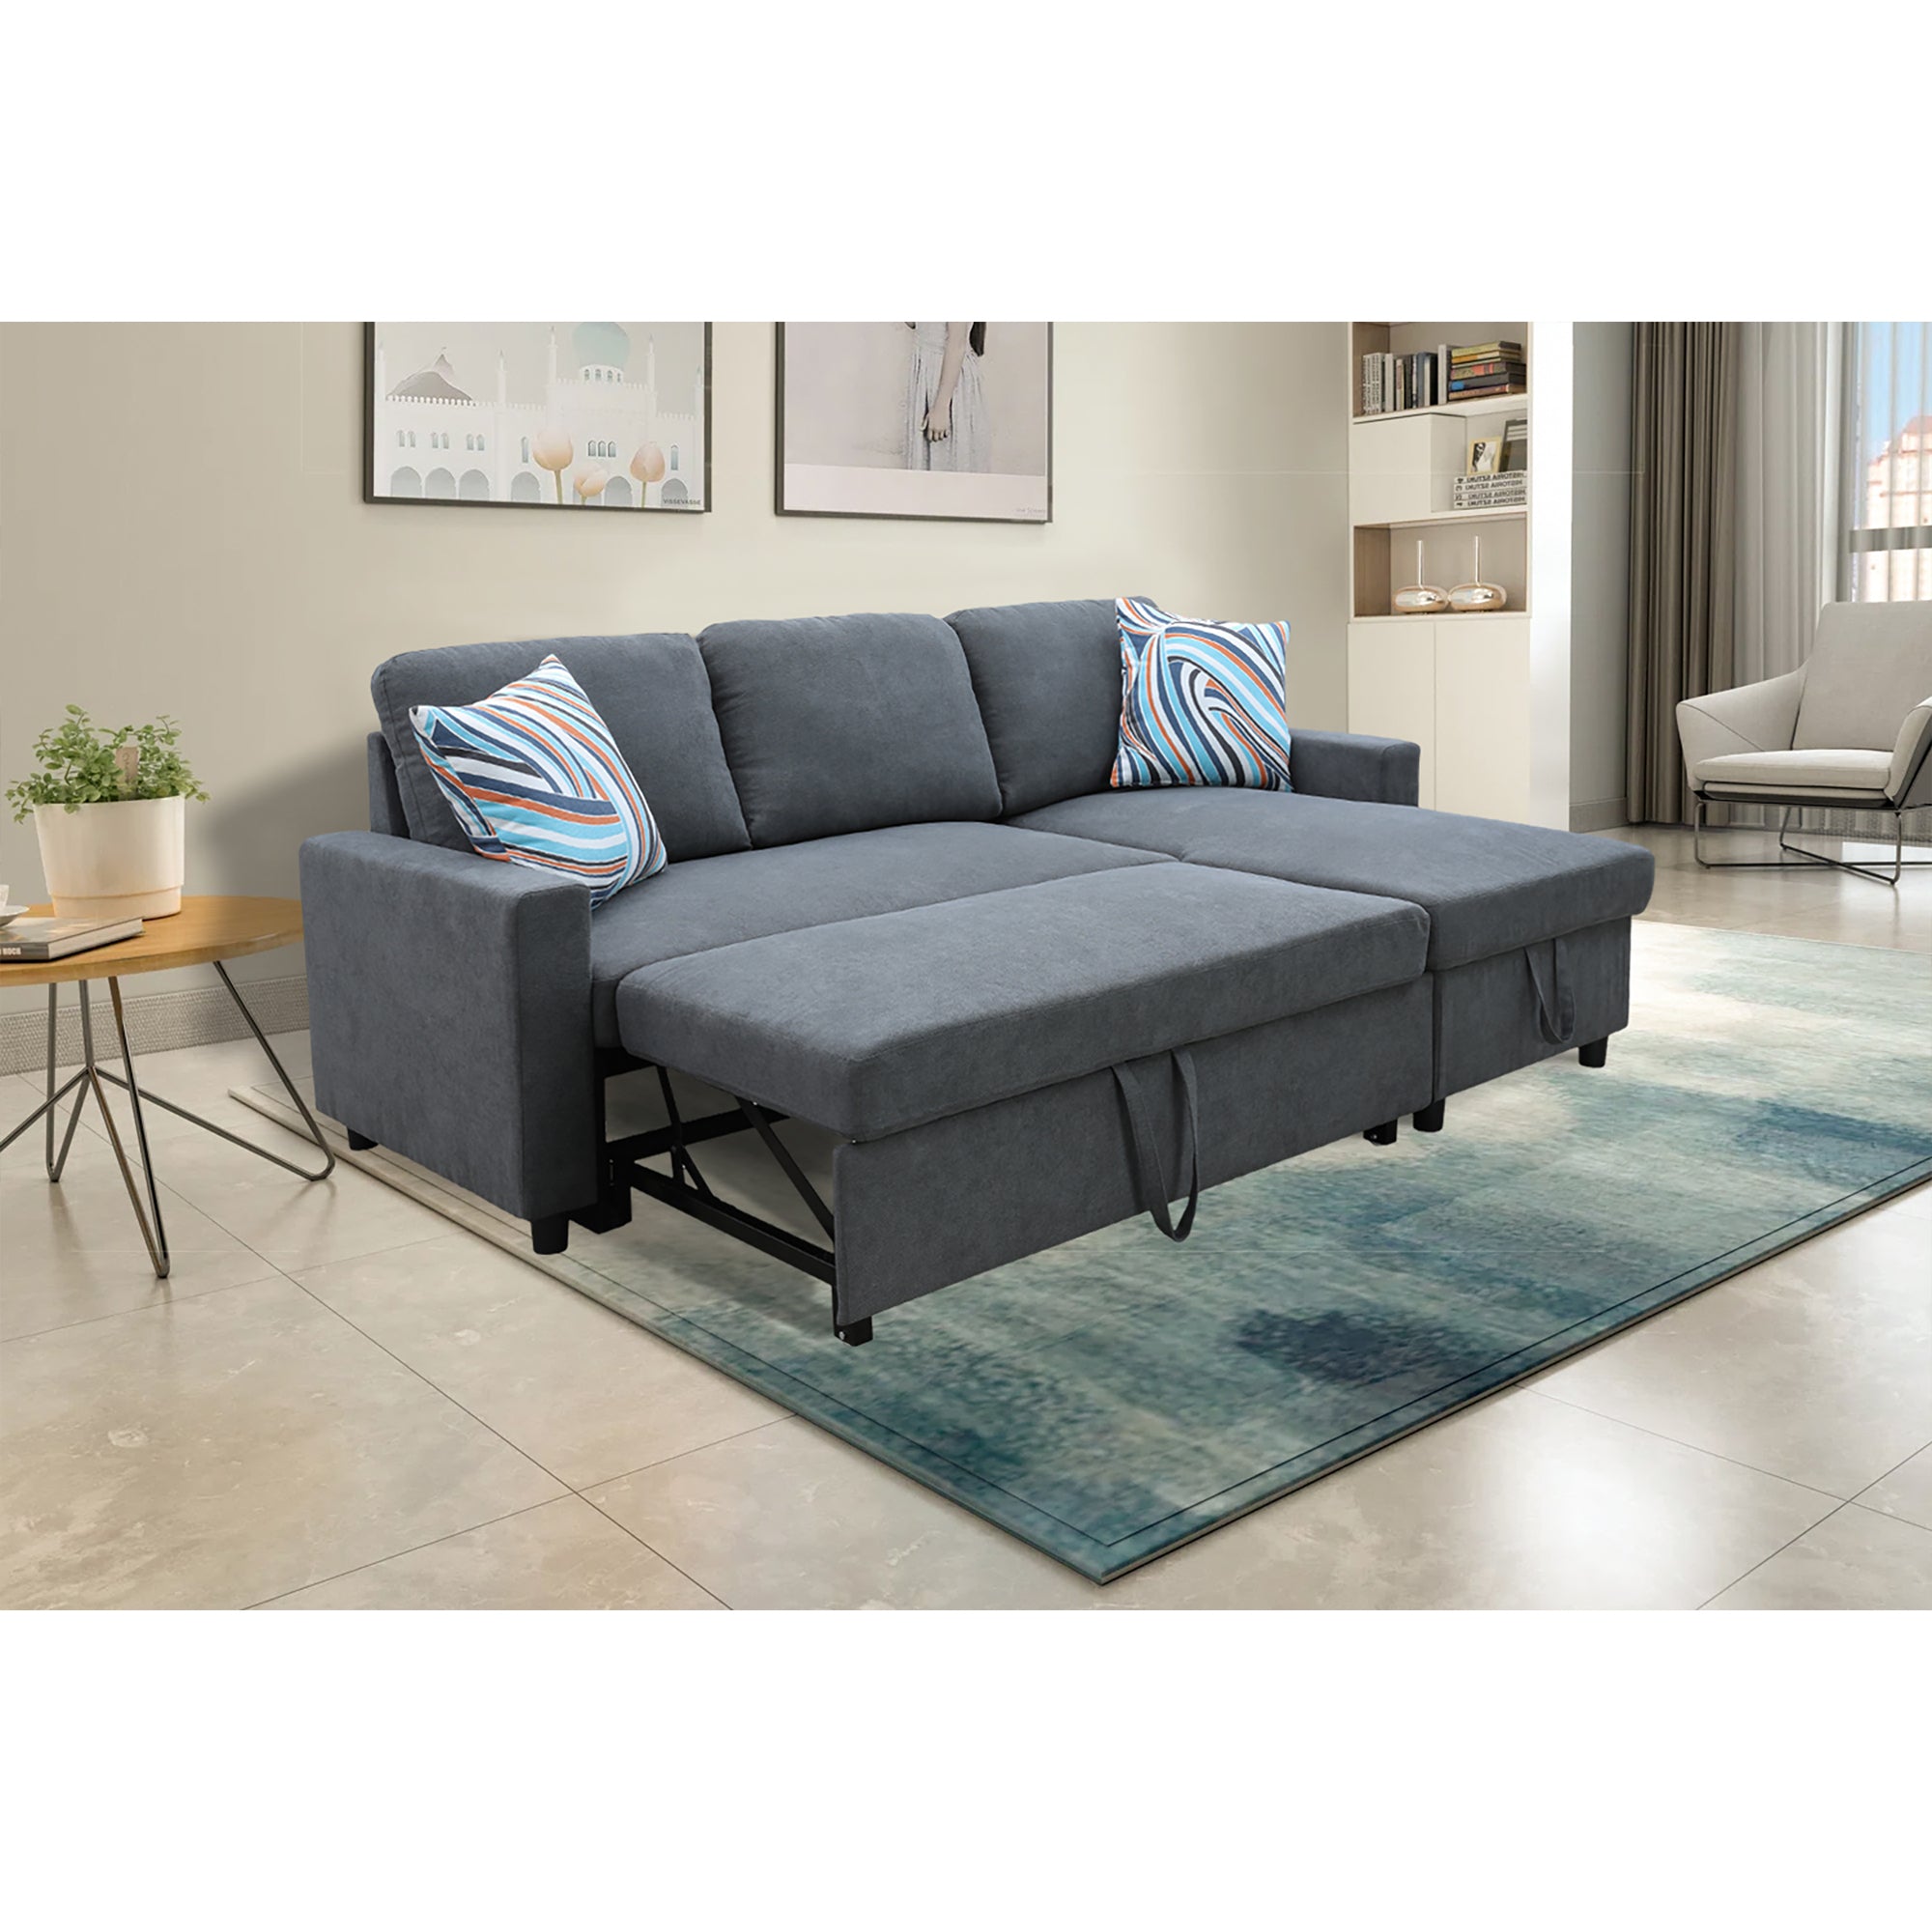 Ainehome Dark Grey Flannelette L-Shaped Sofa bed